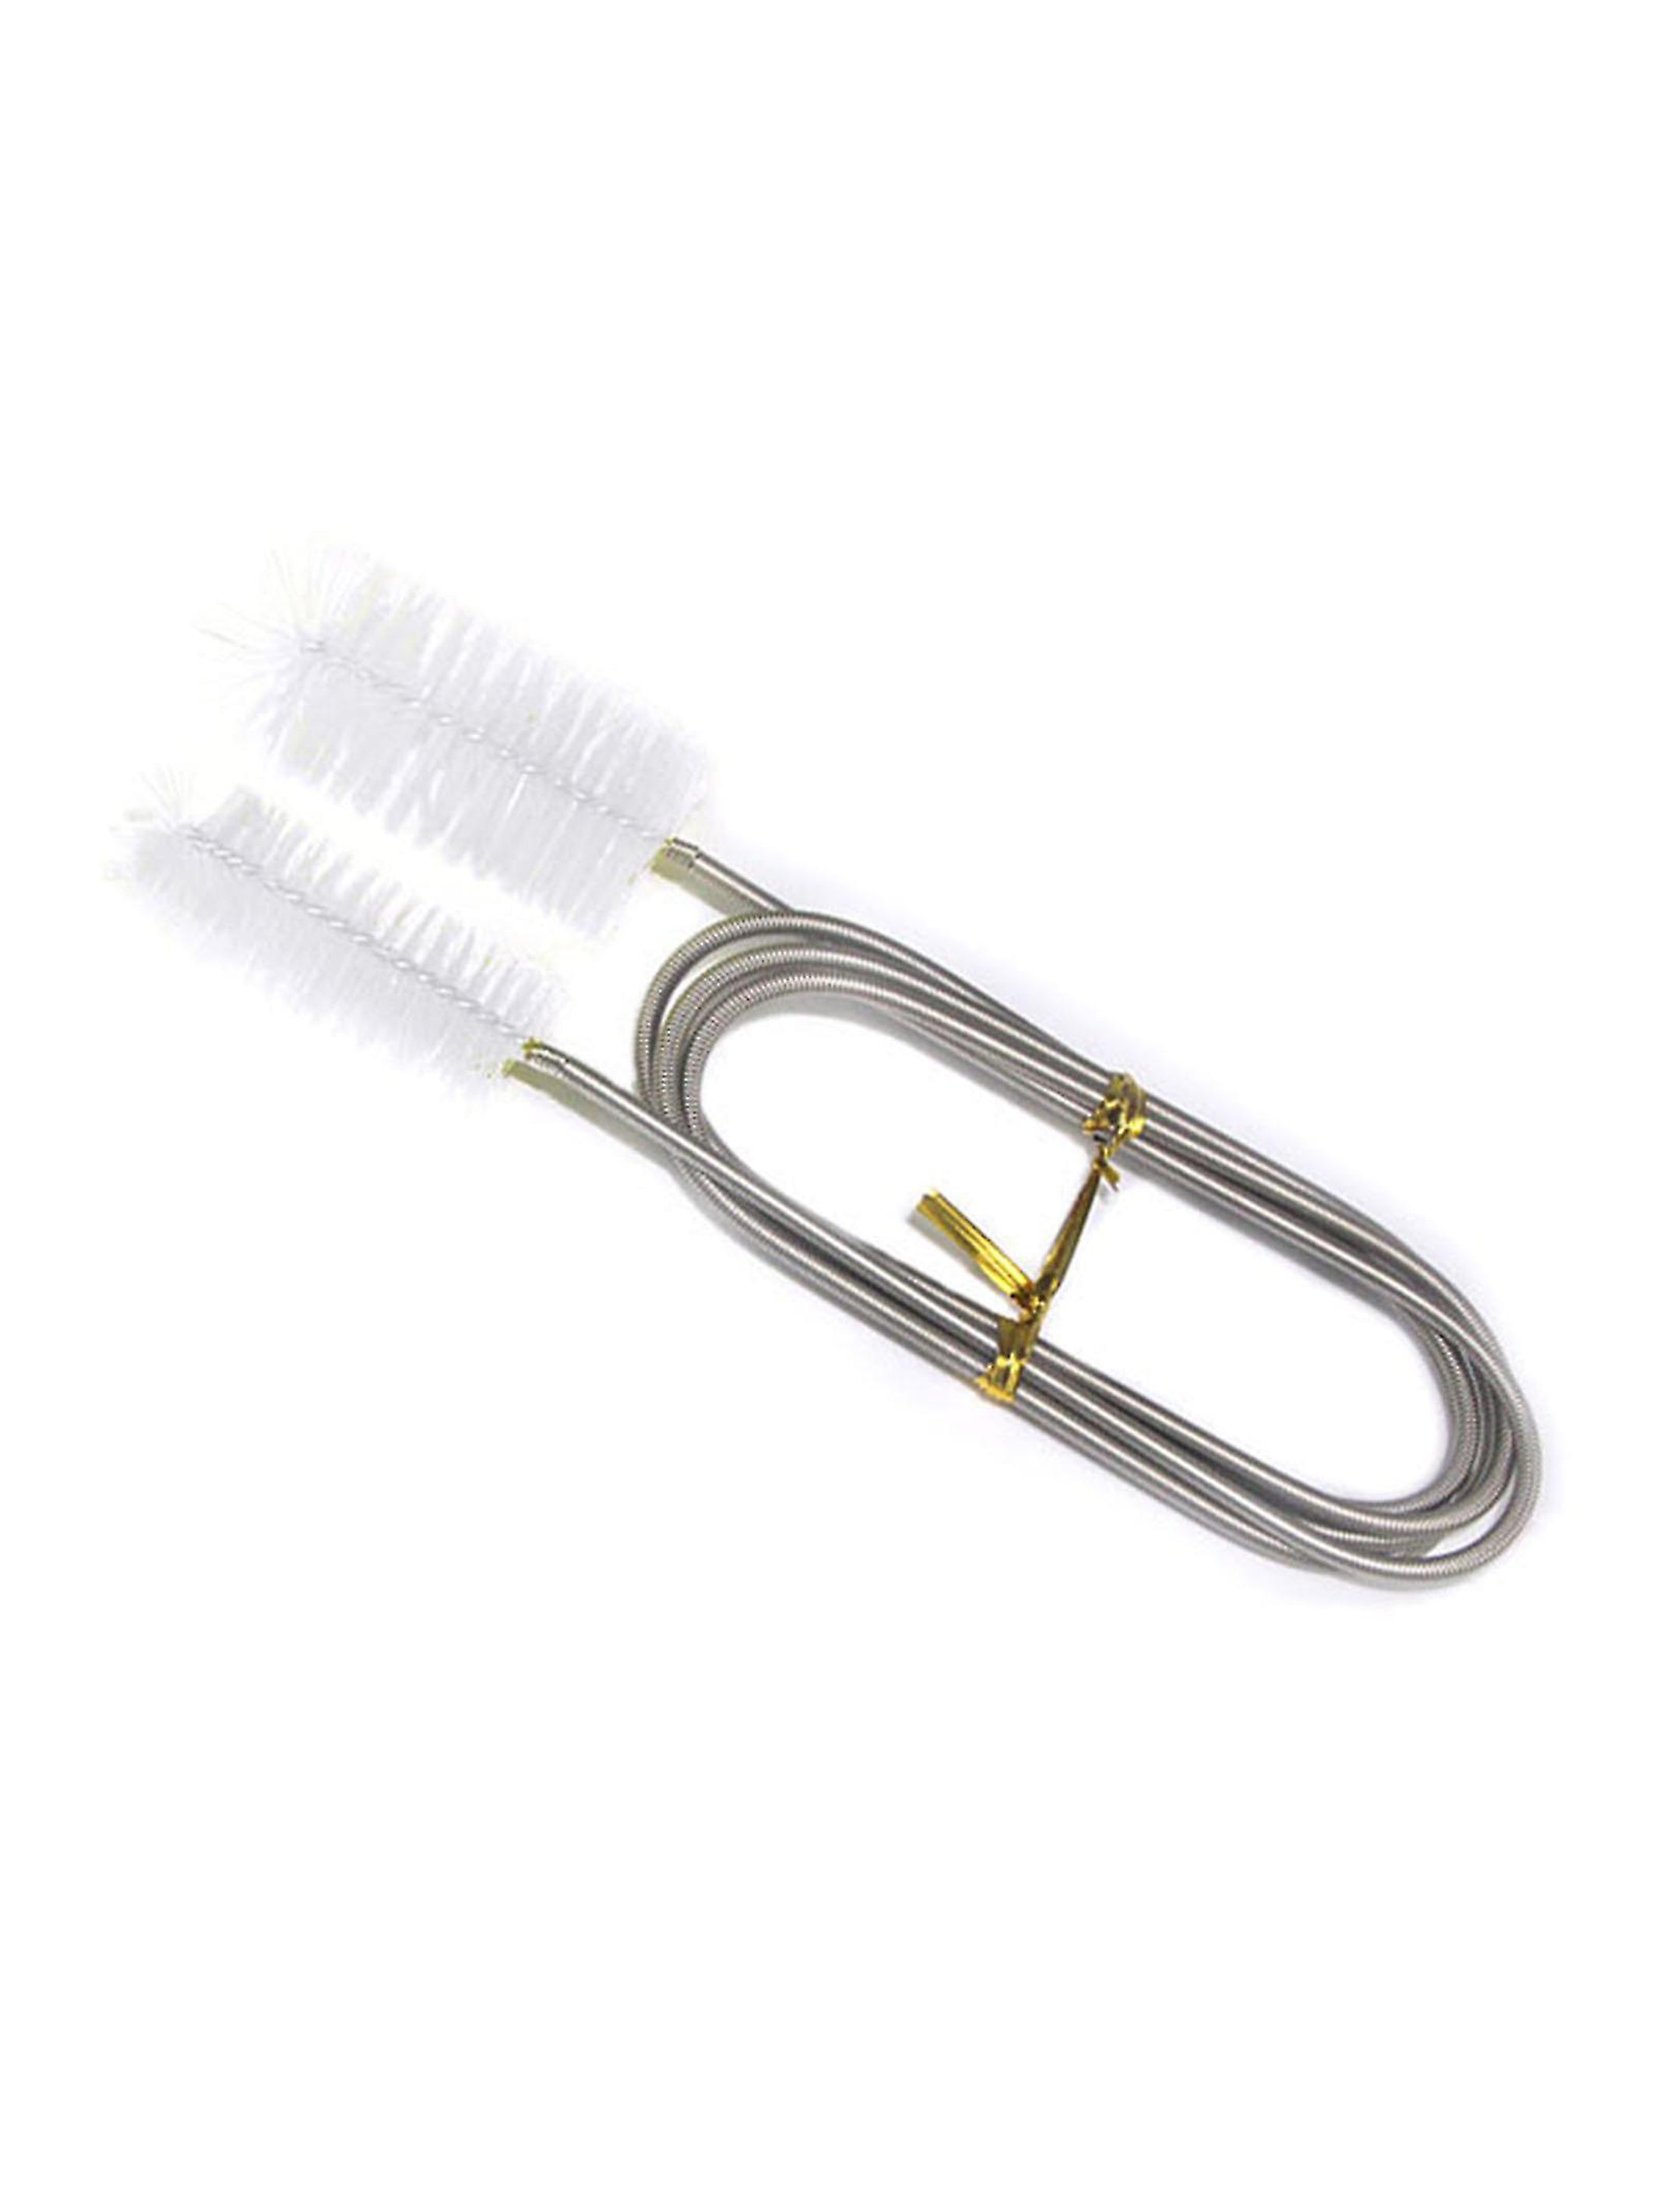 Double Ended Flexible Stainless Steel Cleaning Brush - nepalaquastudio